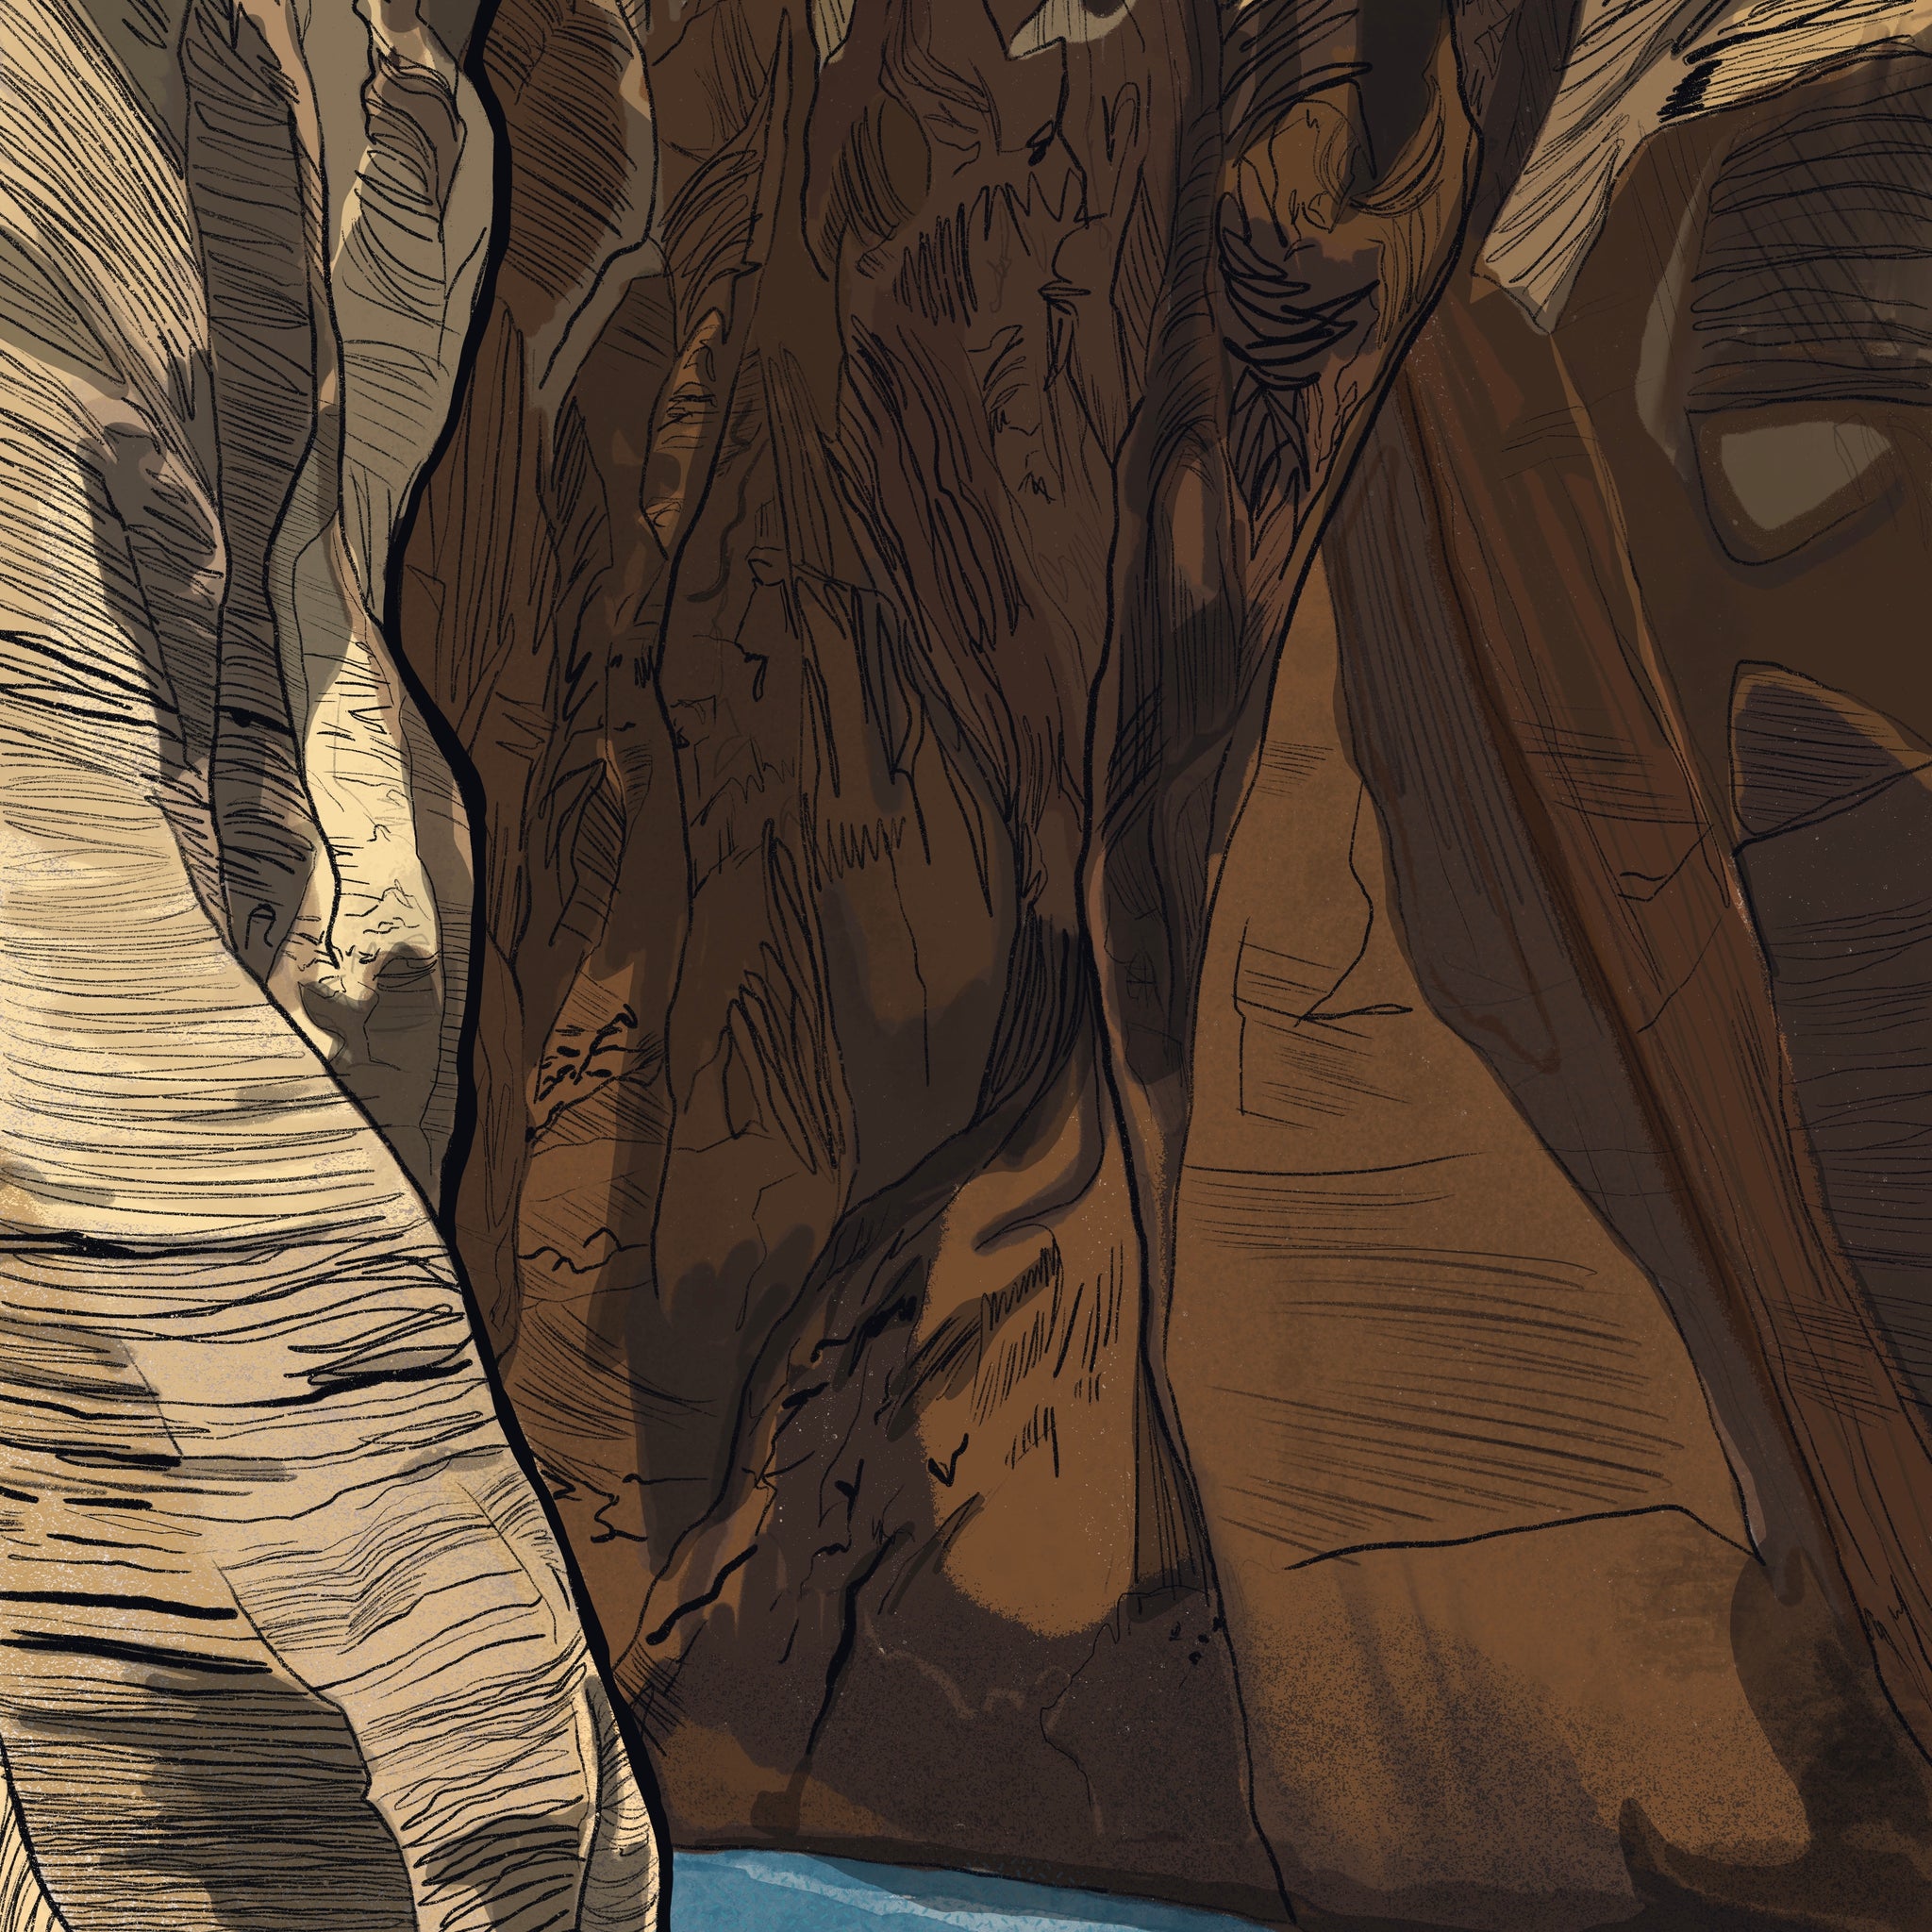 The Narrows (Zion)